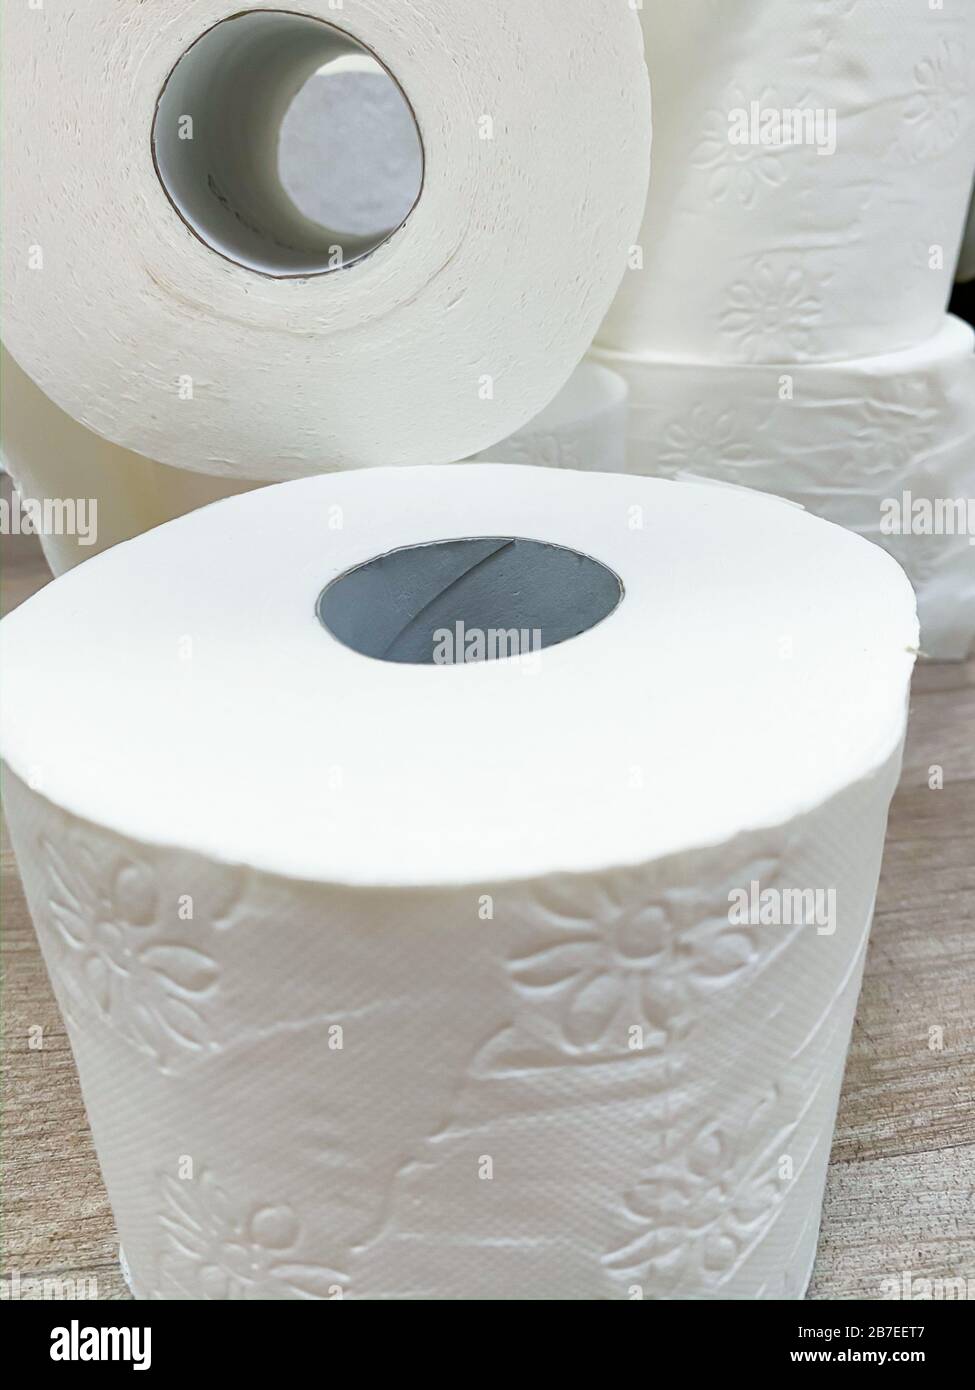 Stacks of empty and full white toilet paper rolls Stock Photo - Alamy